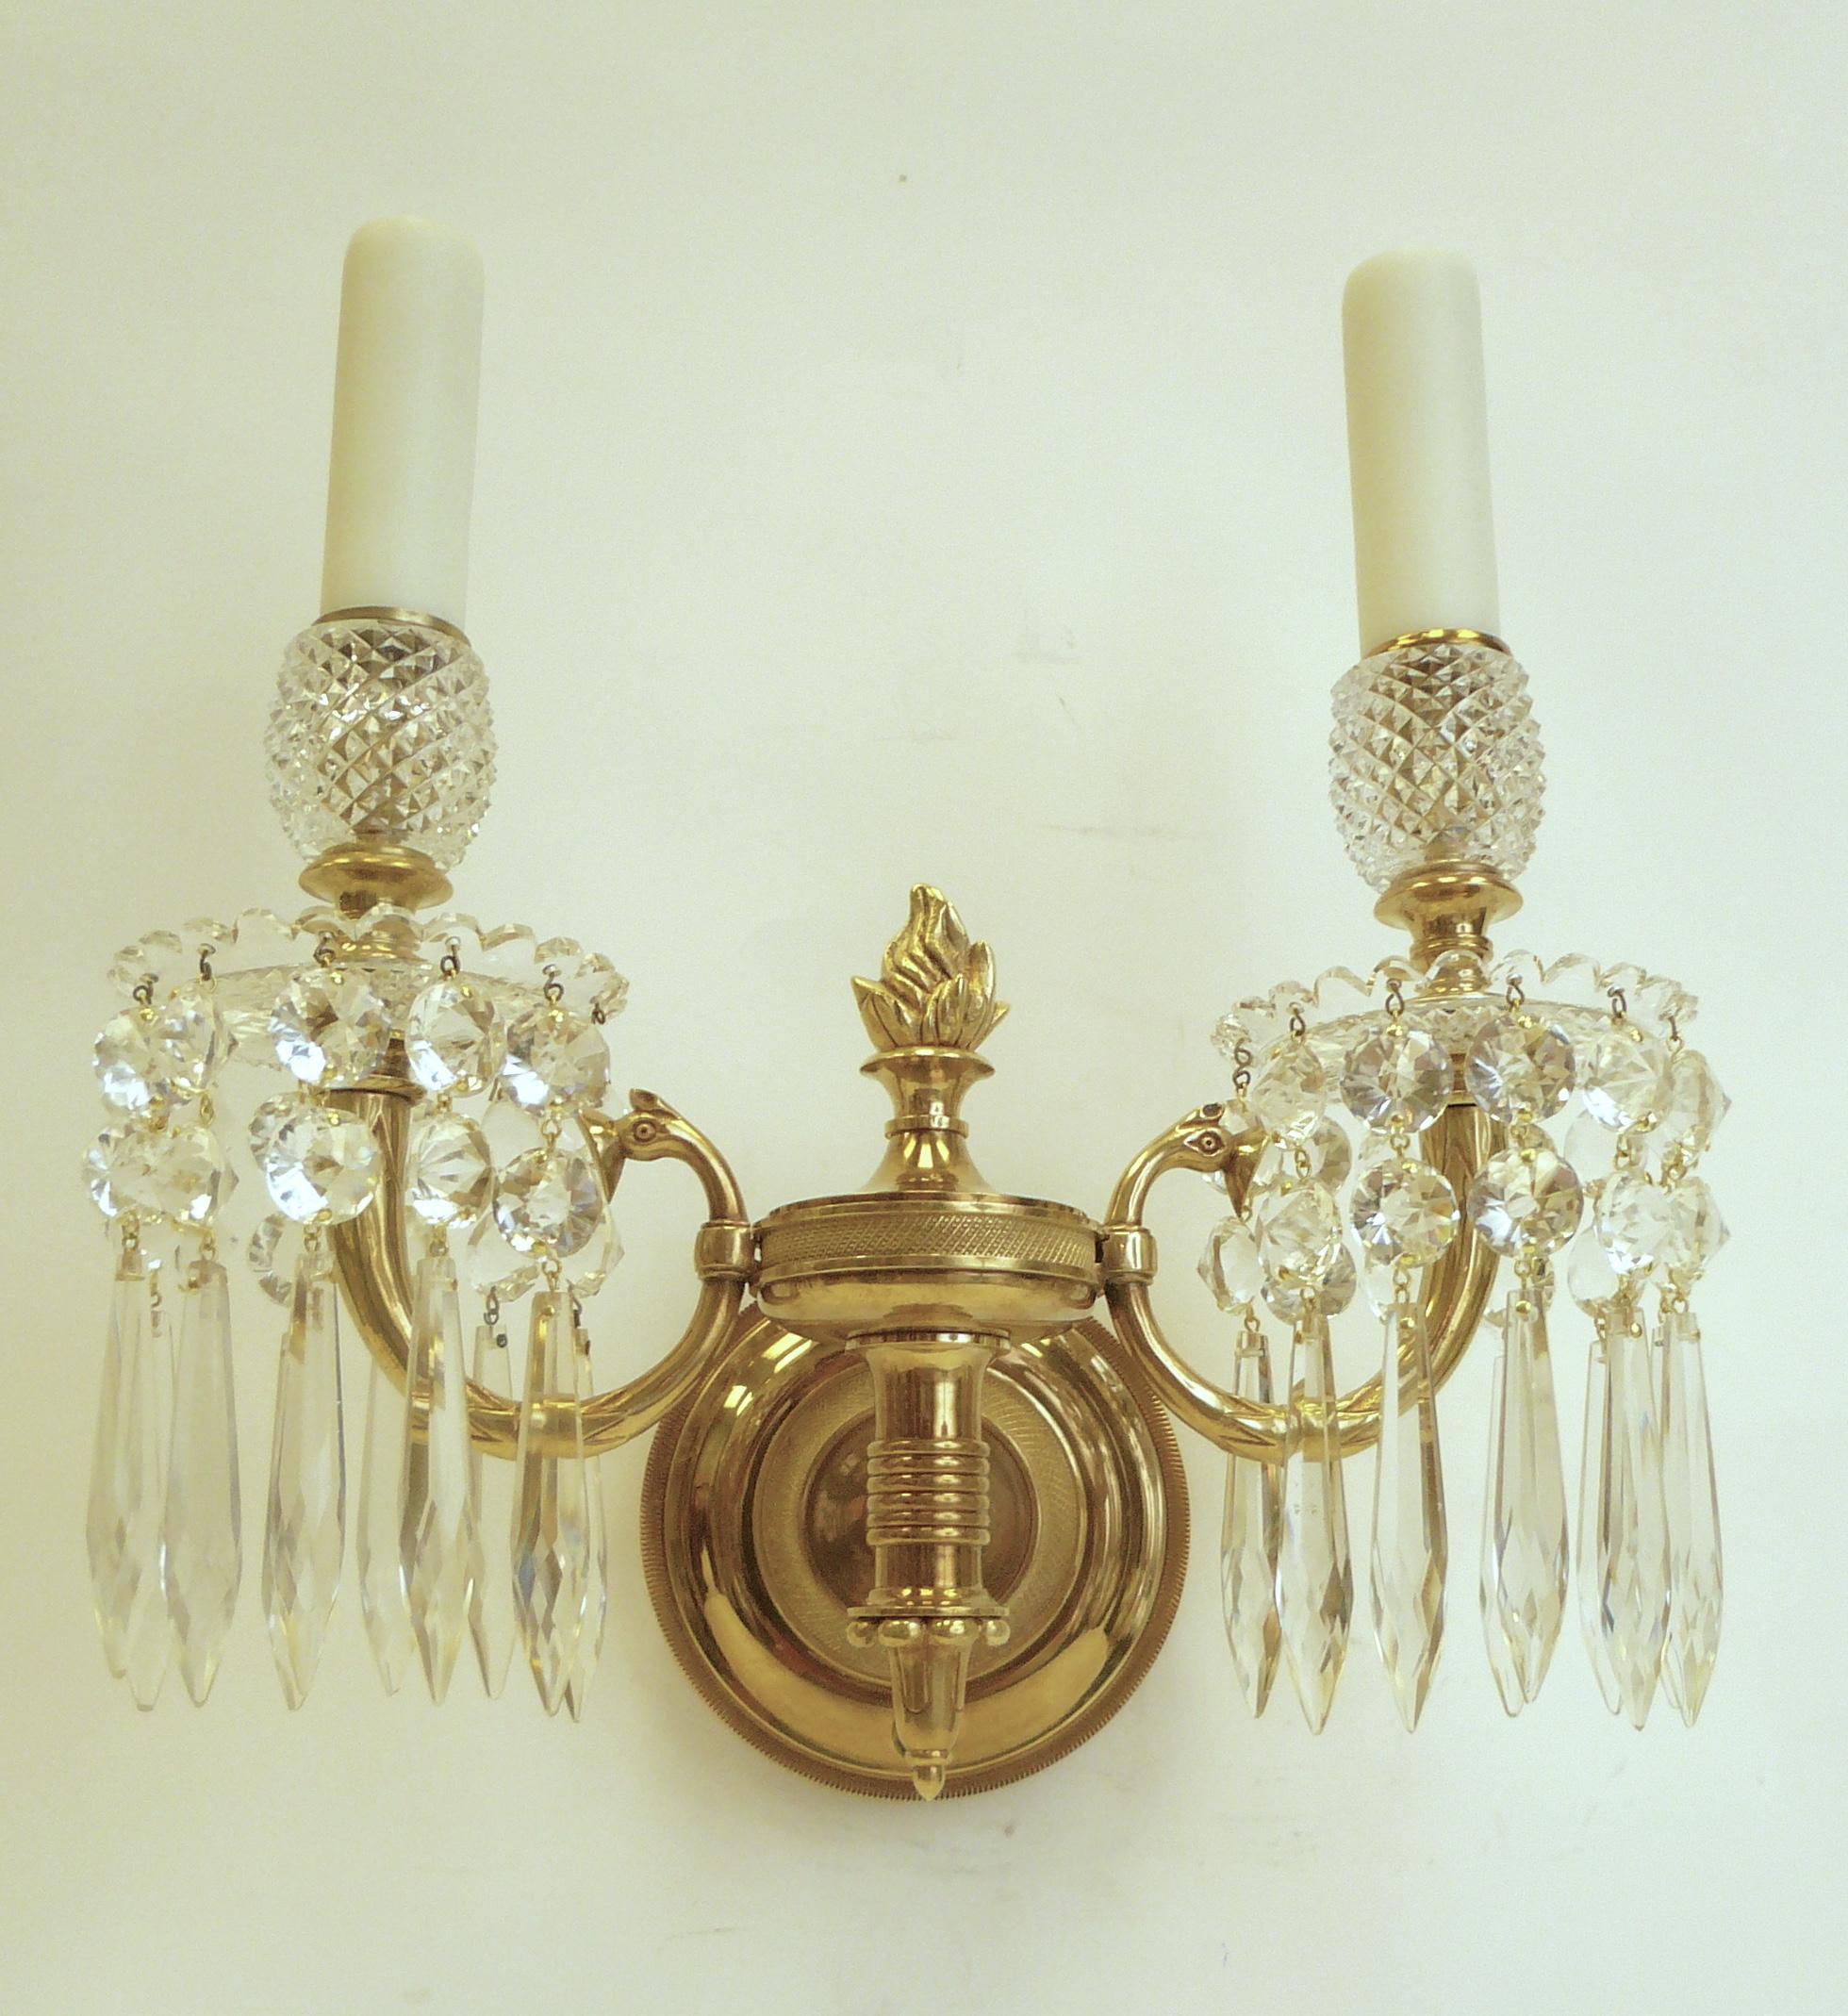 These fine quality English sconces feature flame finials, and diamond cut candle cups.